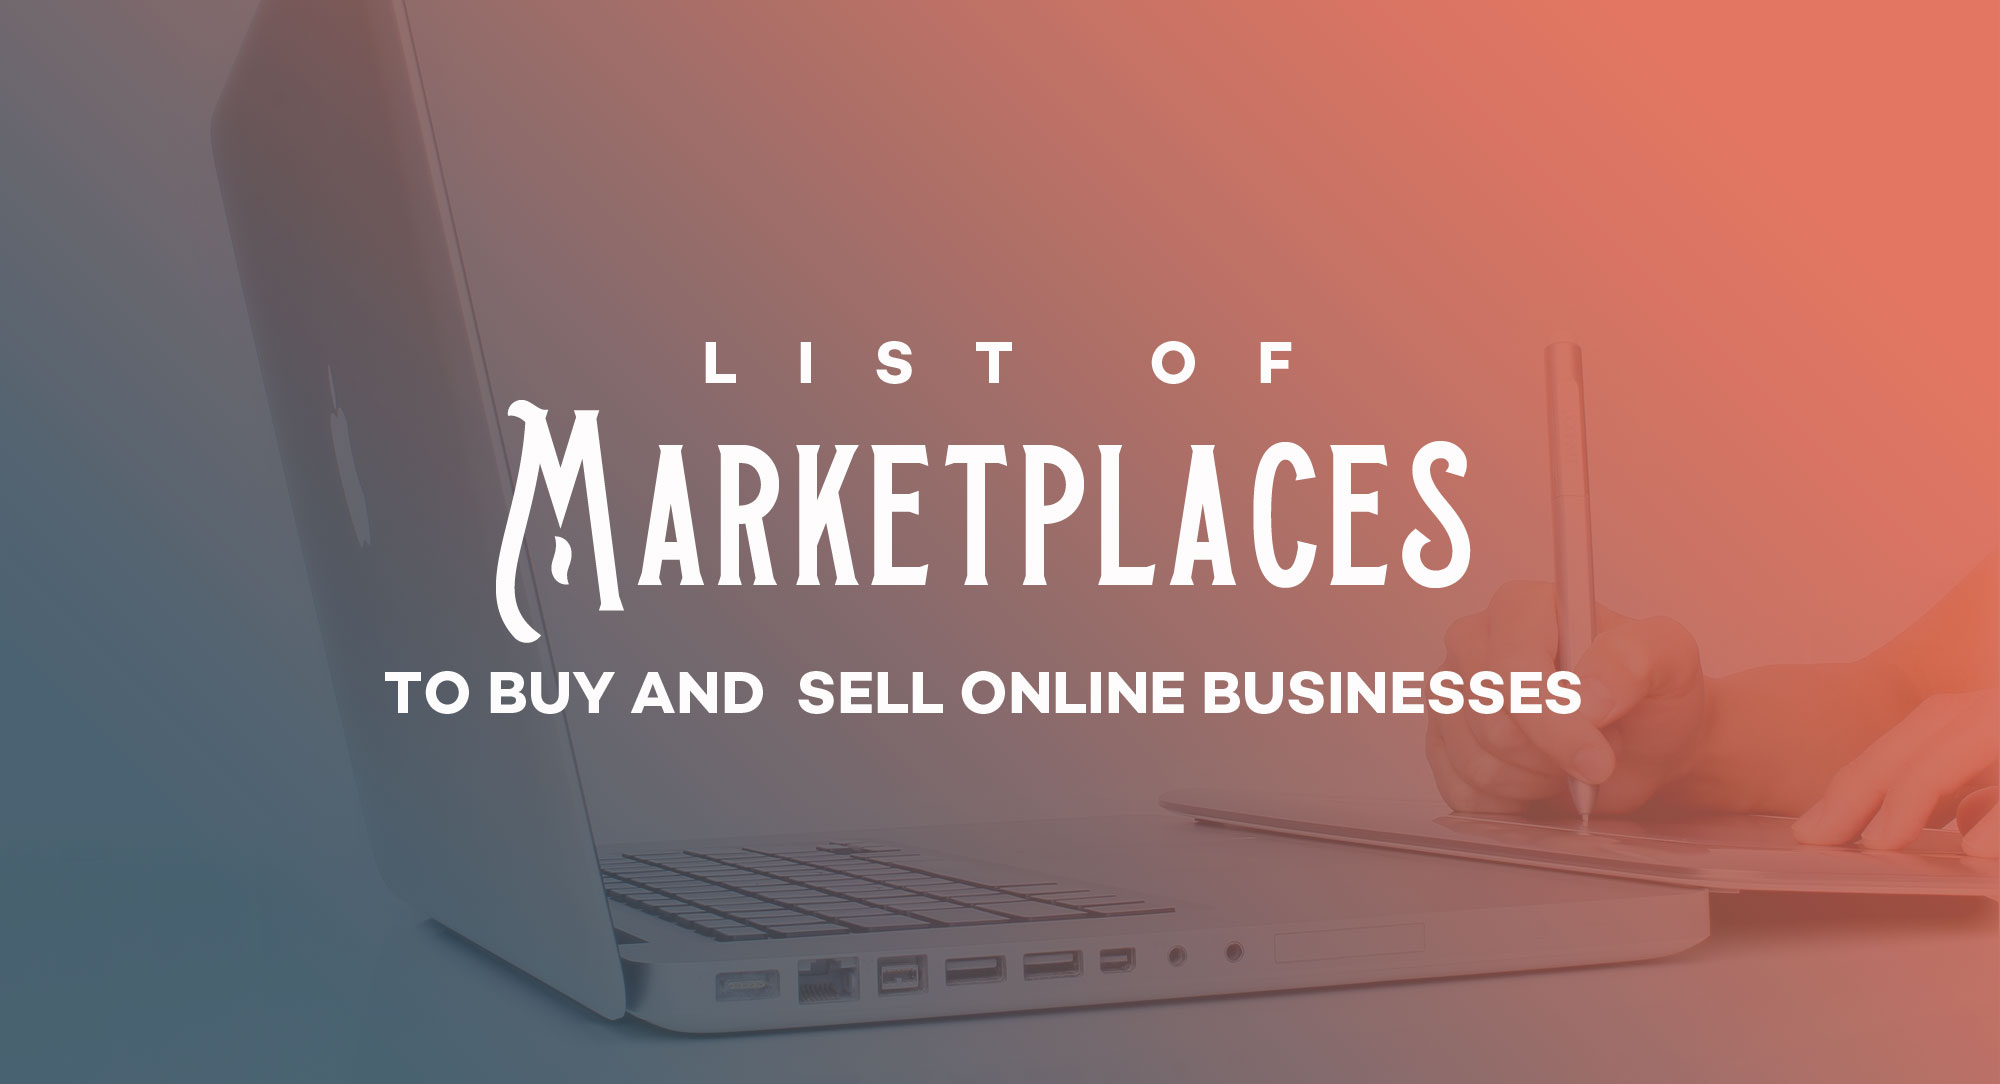 List-of-marketplaces-to-buy-and-sell-online-businesses